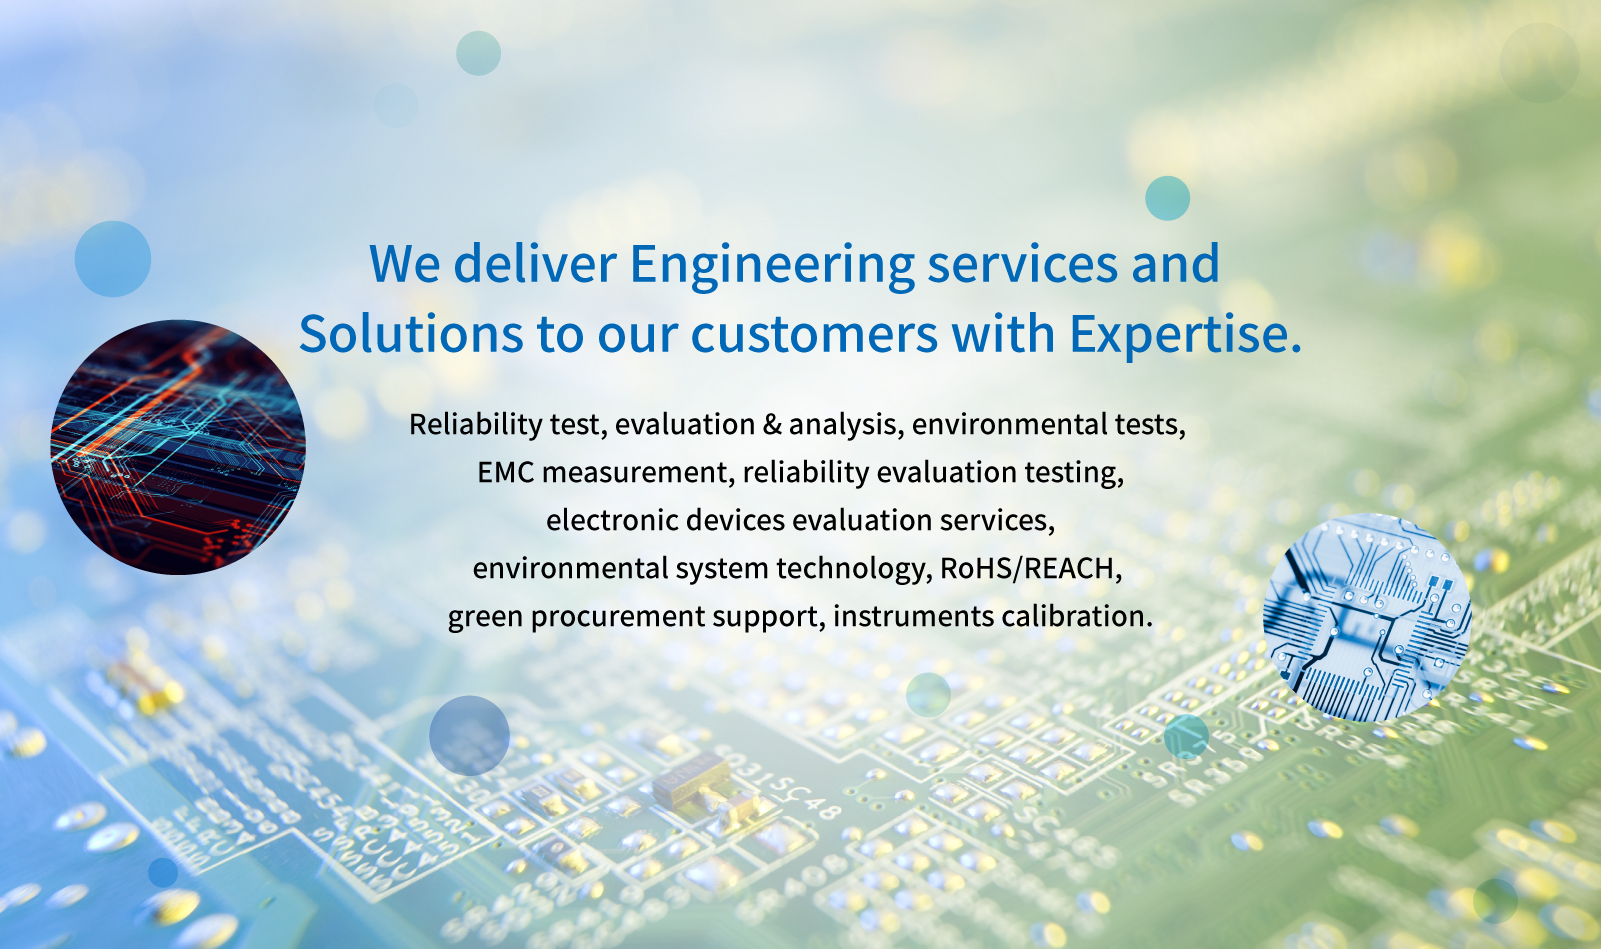 We deliver Engineering services and Solutions to our customers with Expertise.